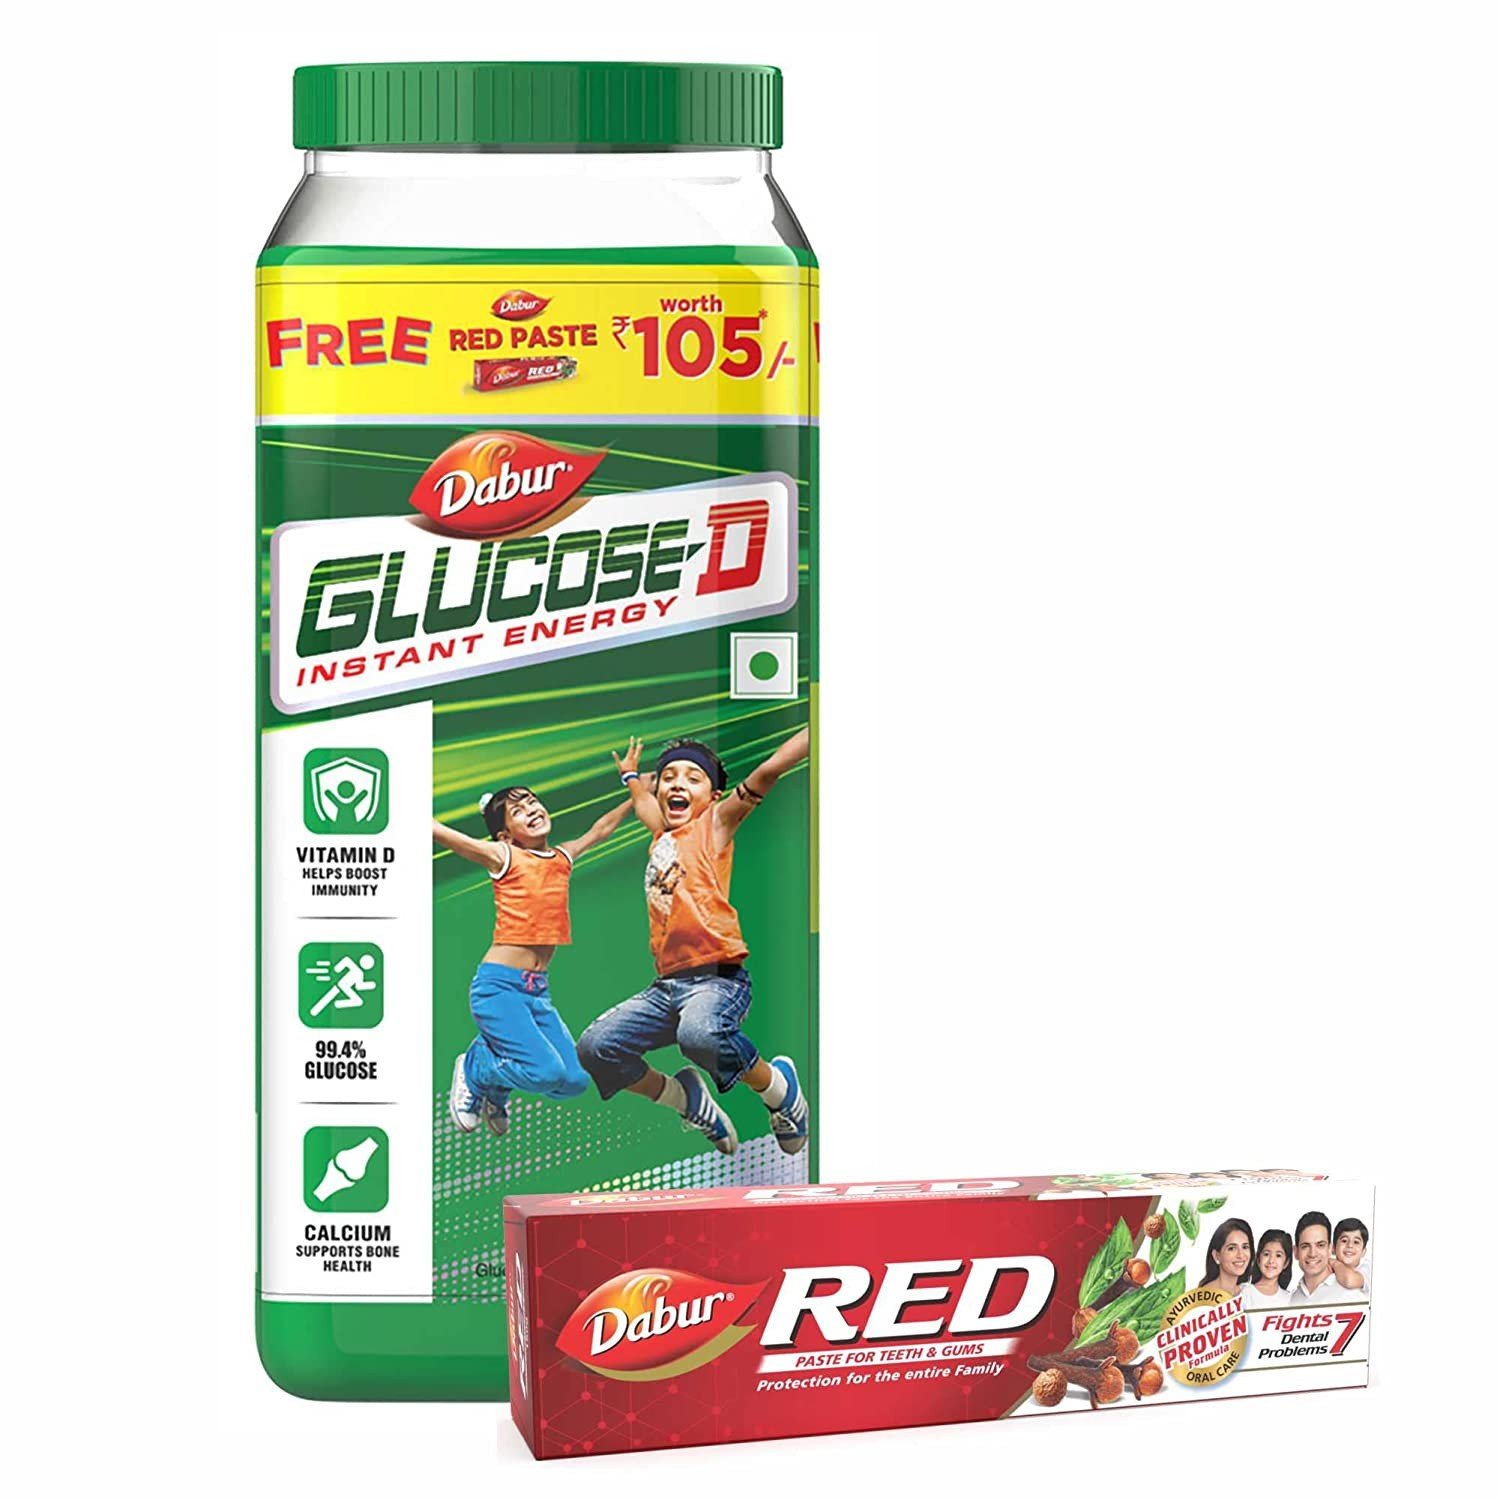 MS Dabur Glucose -D Insant Energy Boost With Vitamin D - 1 Kg With Dabur Red Paste 200g Free